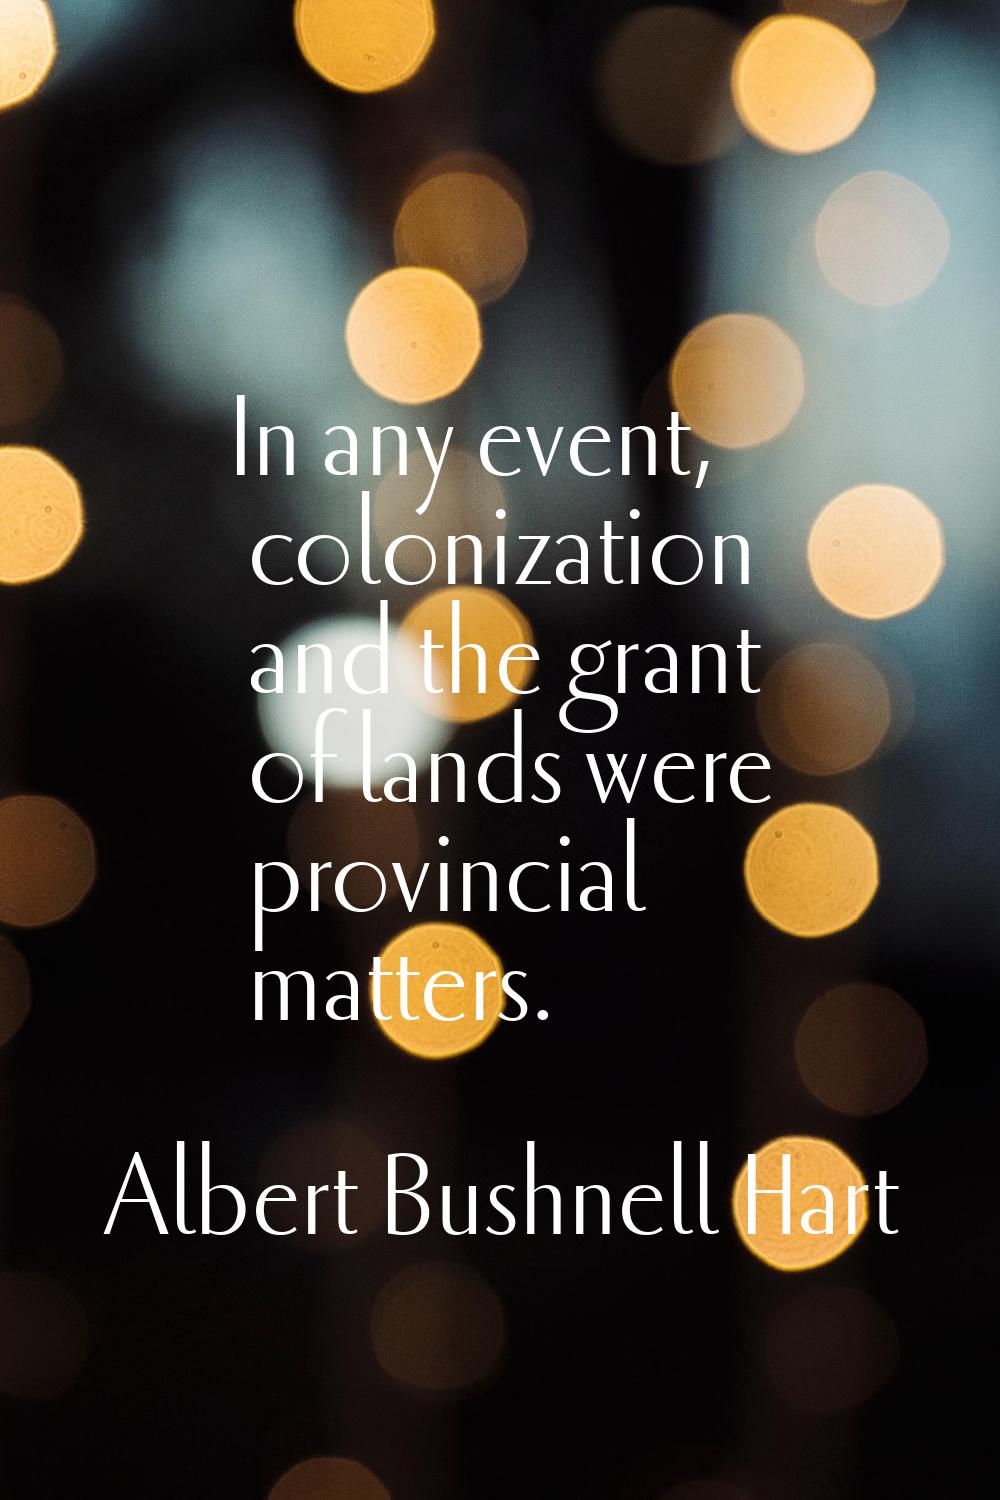 In any event, colonization and the grant of lands were provincial matters.